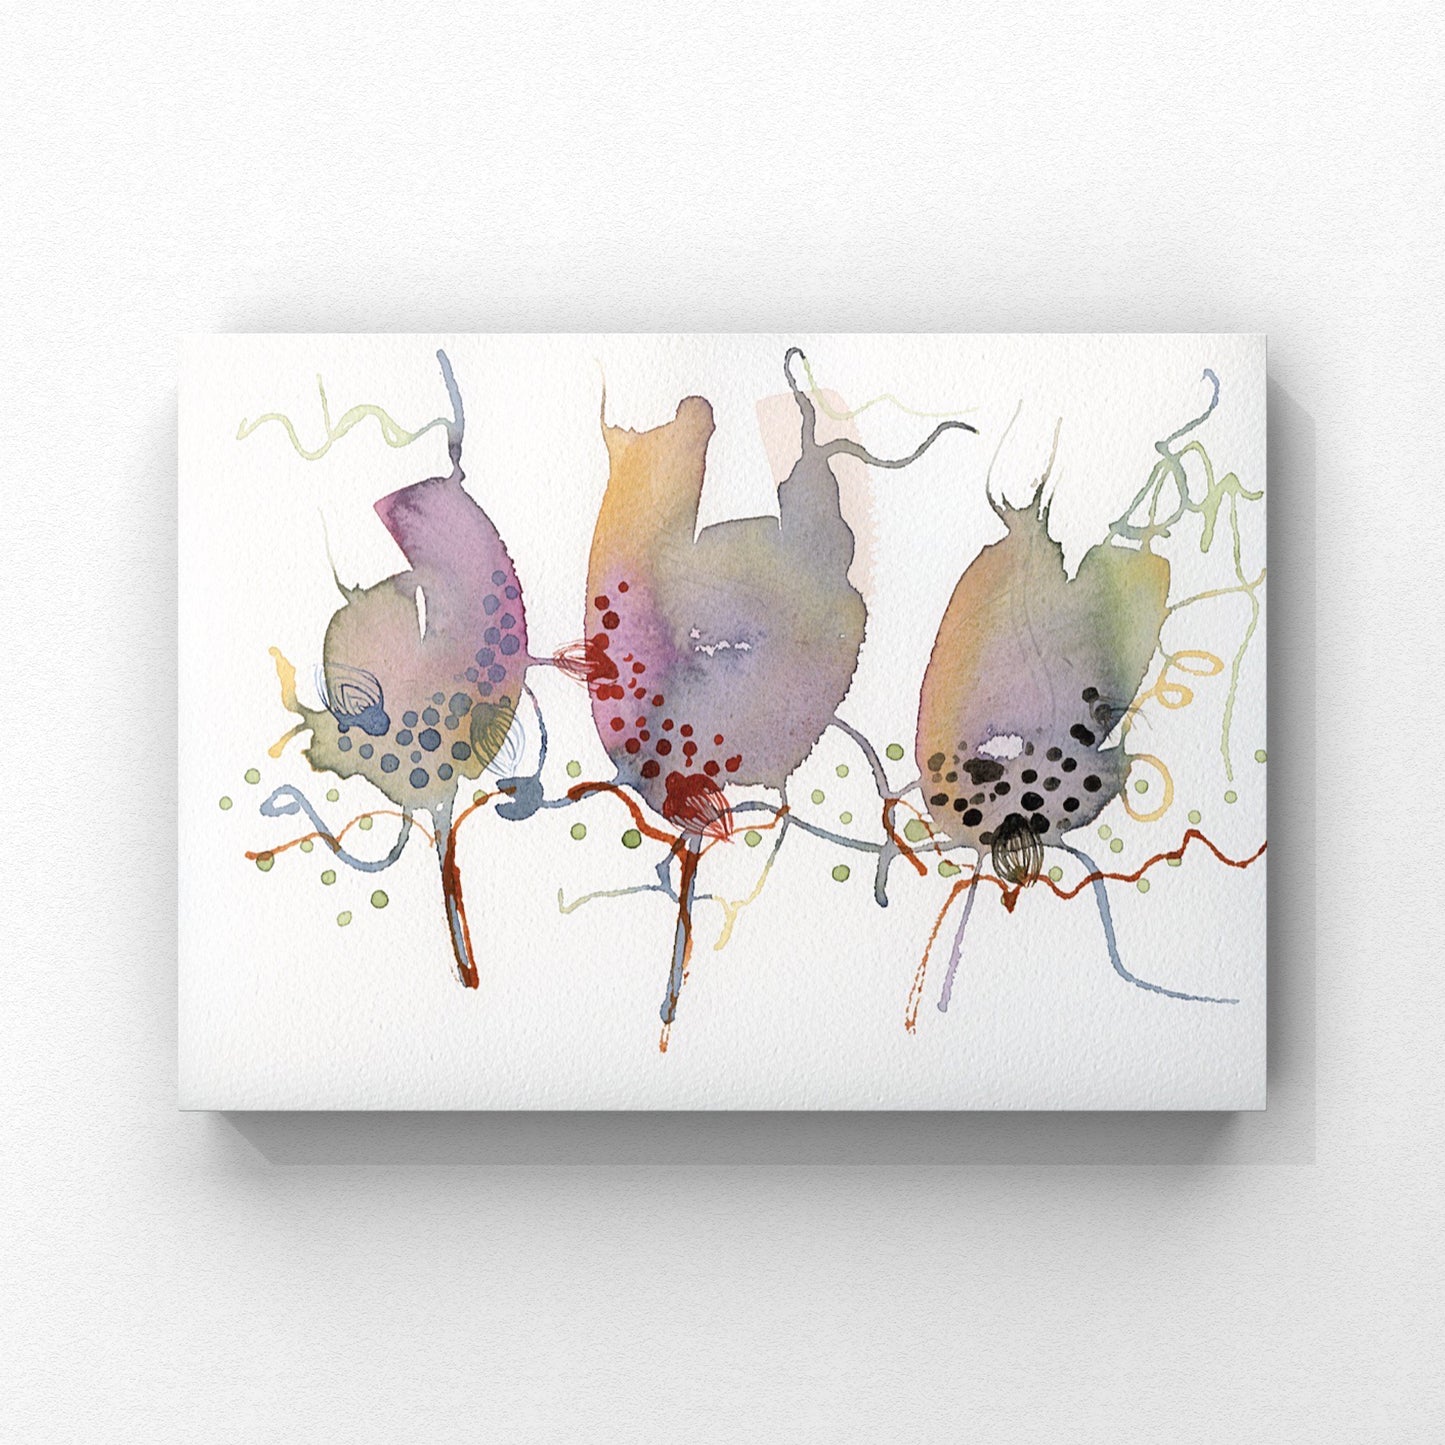 Popsicle Bloom - Limited Edition Print of Original Art Bloom Being